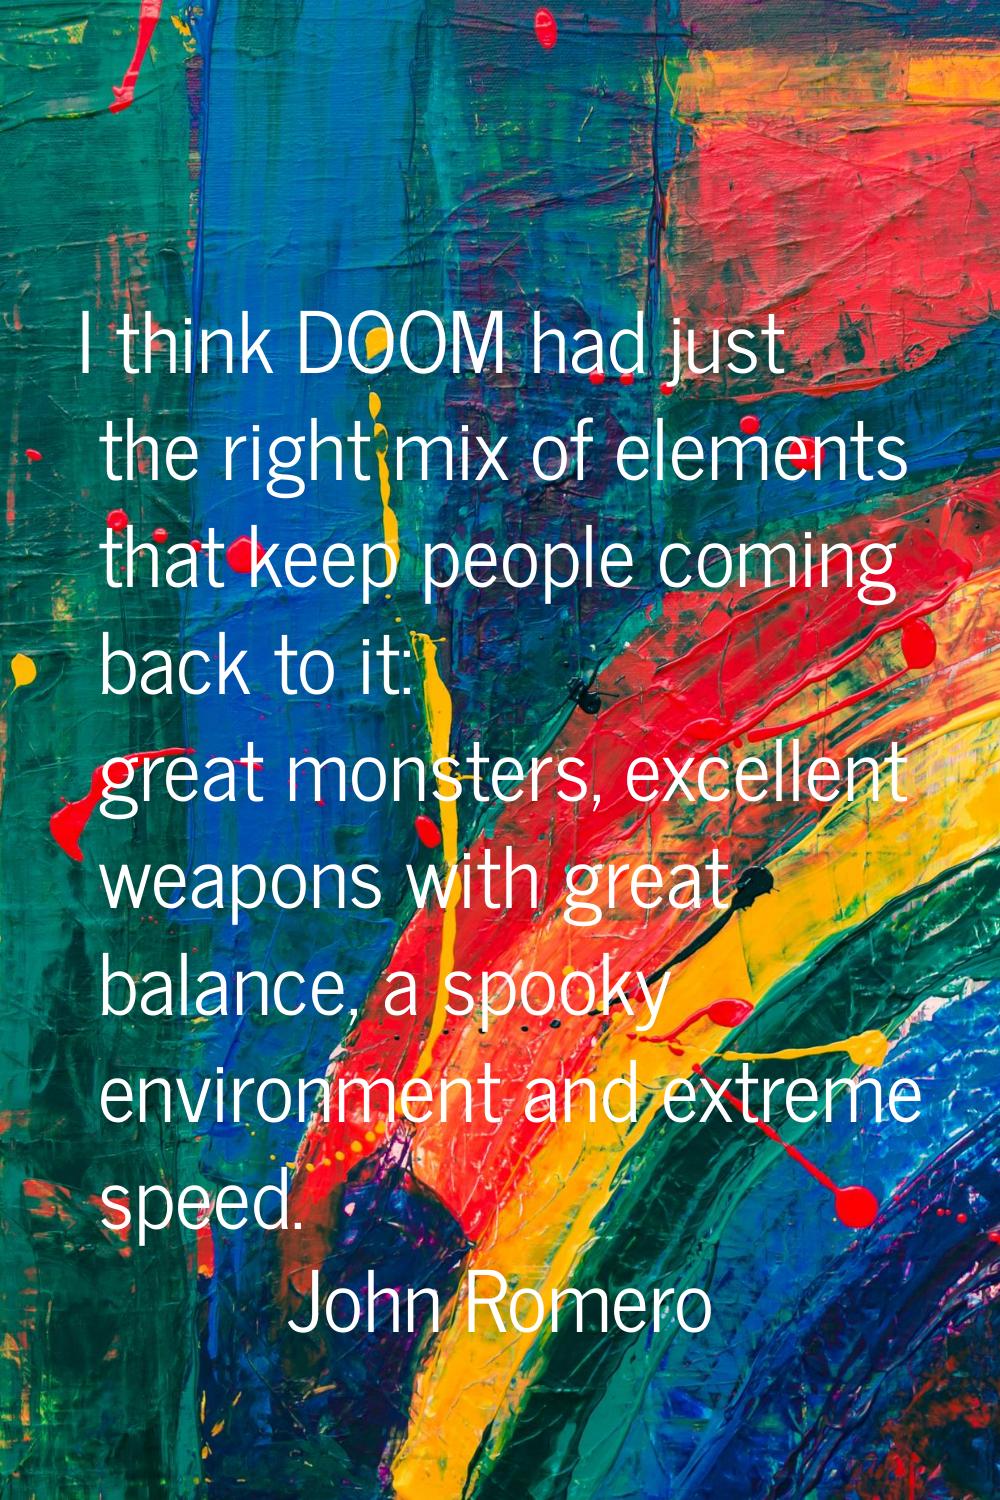 I think DOOM had just the right mix of elements that keep people coming back to it: great monsters,